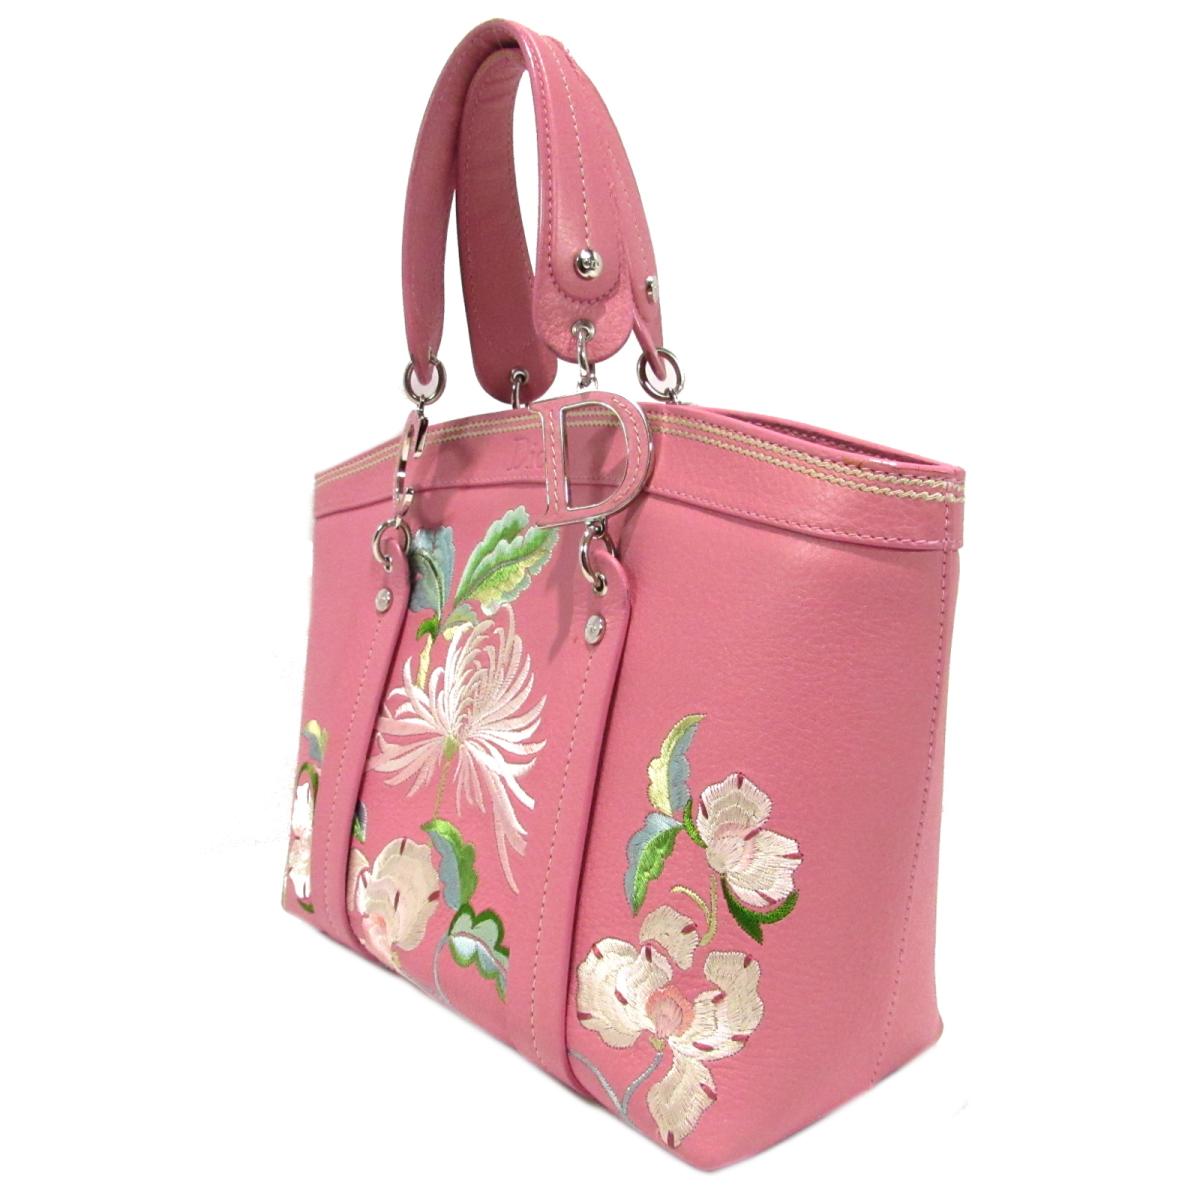 christian dior pink bag with indian embroidery